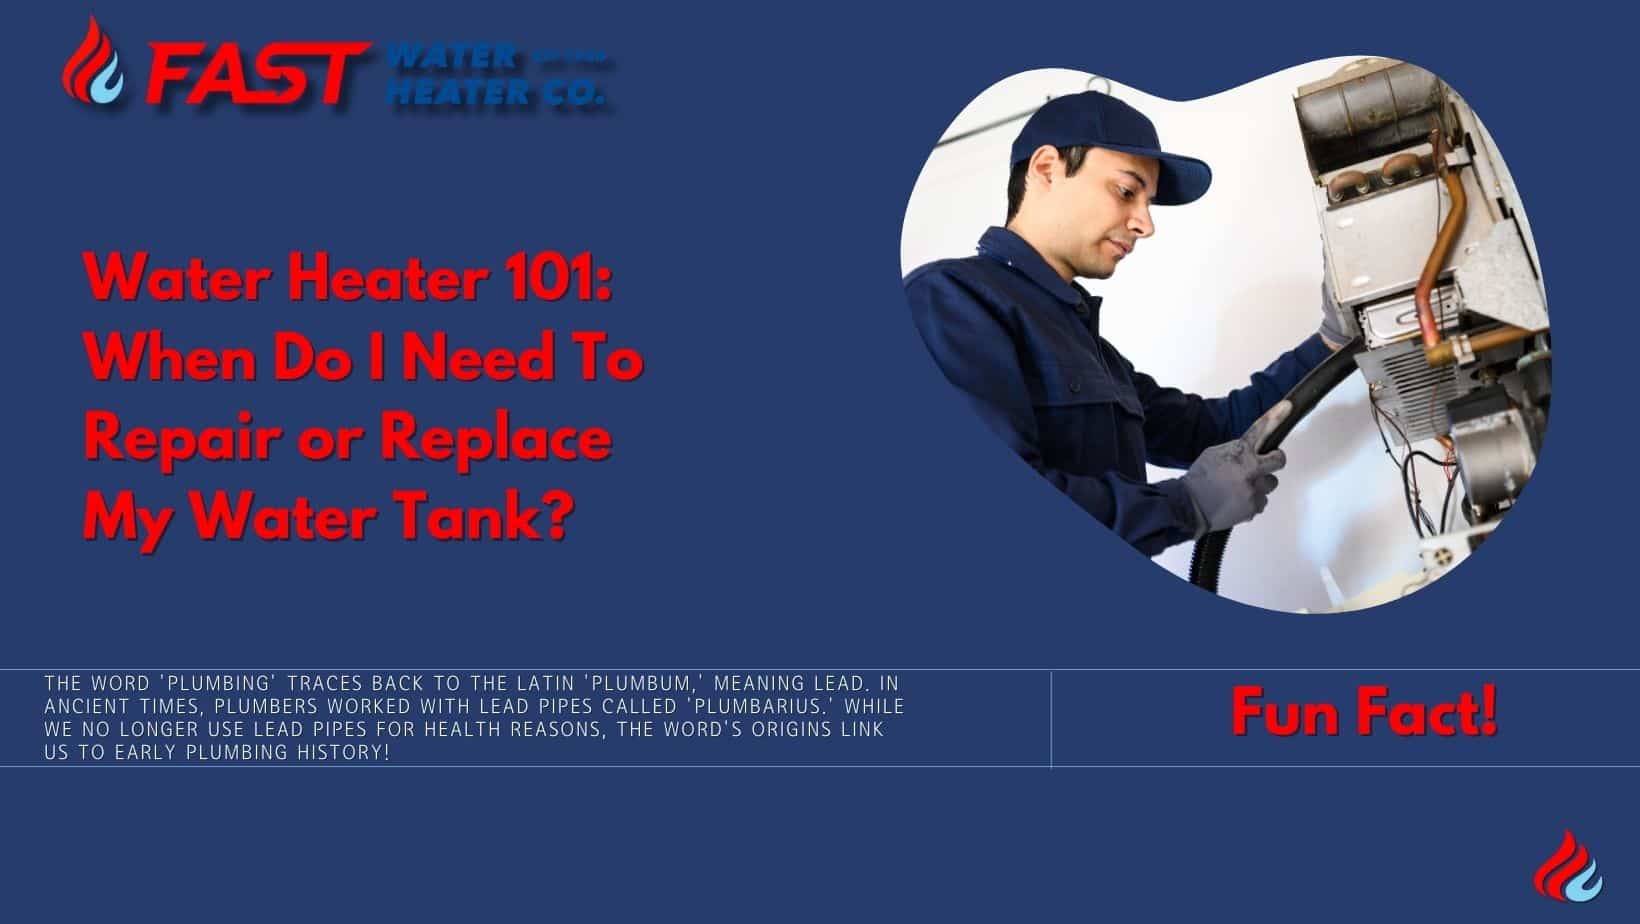 Water Heater 101: When Do I Need To Repair or Replace My Water Tank?